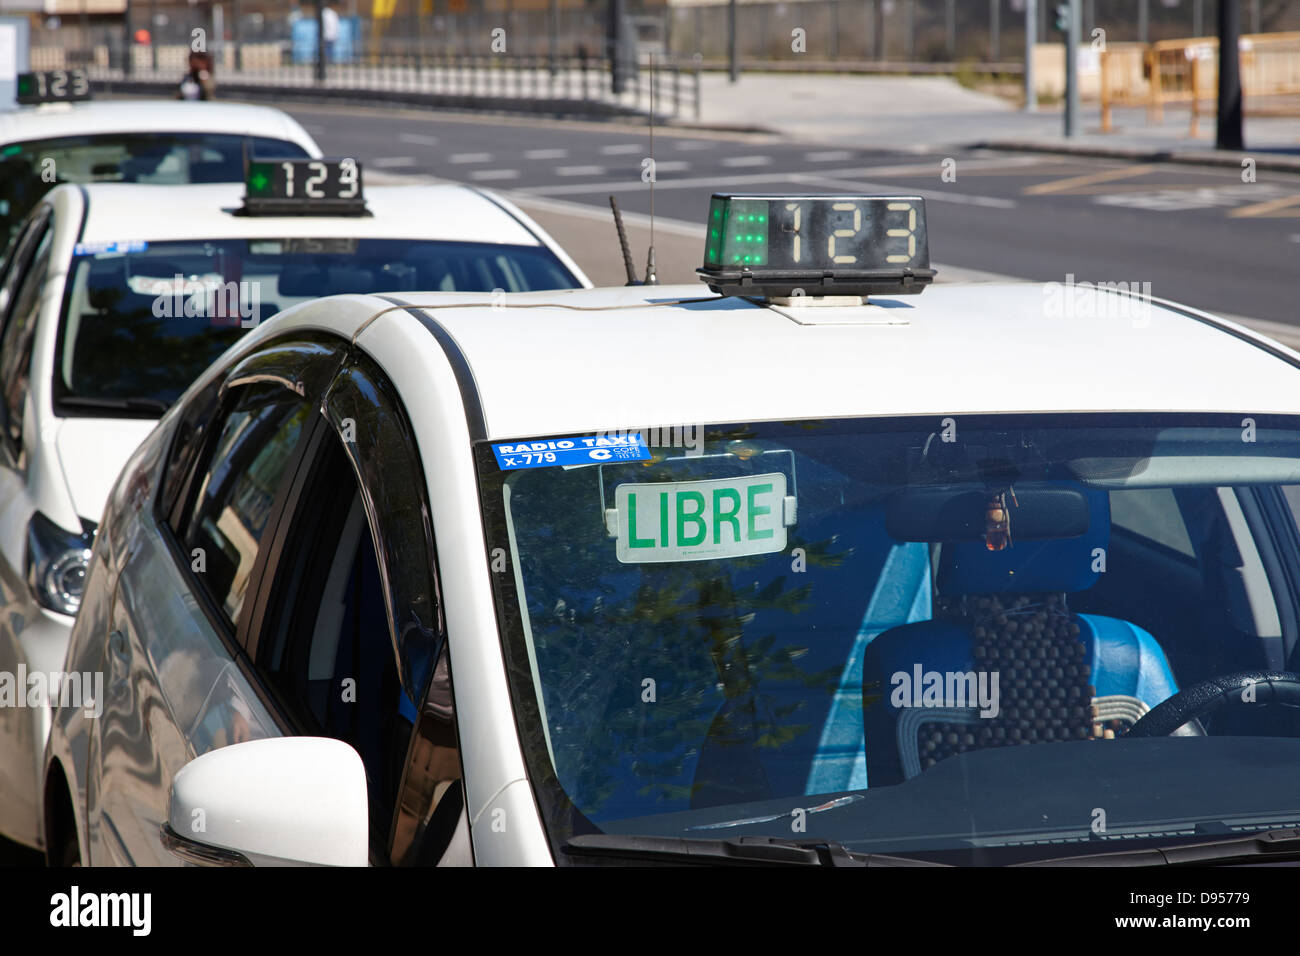 Taxi rank spain hi-res stock photography and images - Alamy